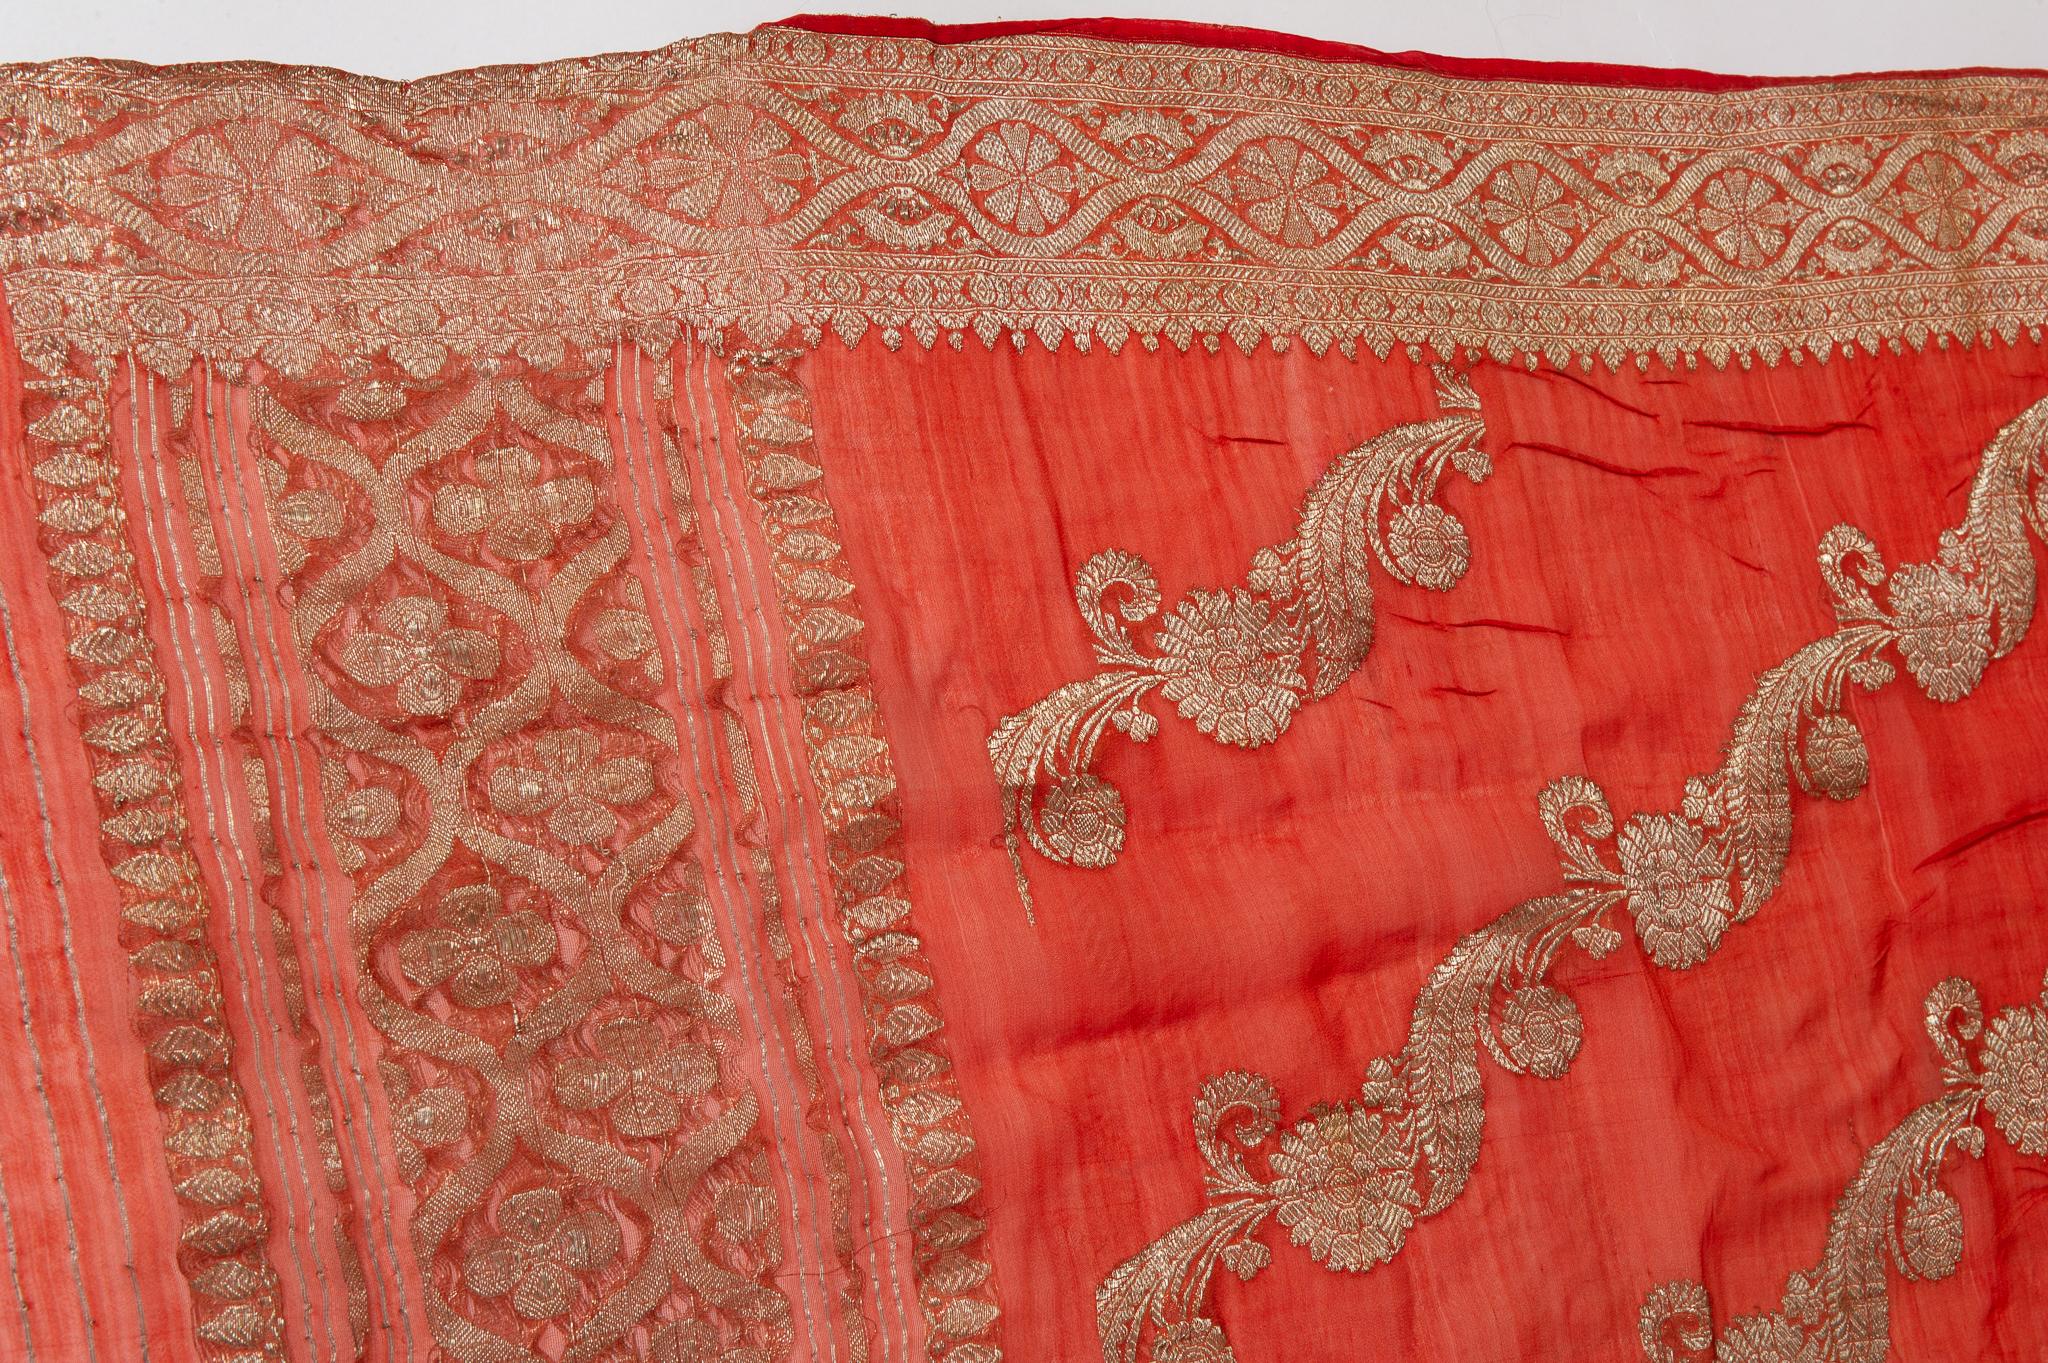  Indian Sari Coral Color New Idea for Unusual Curtains Also For Sale 7